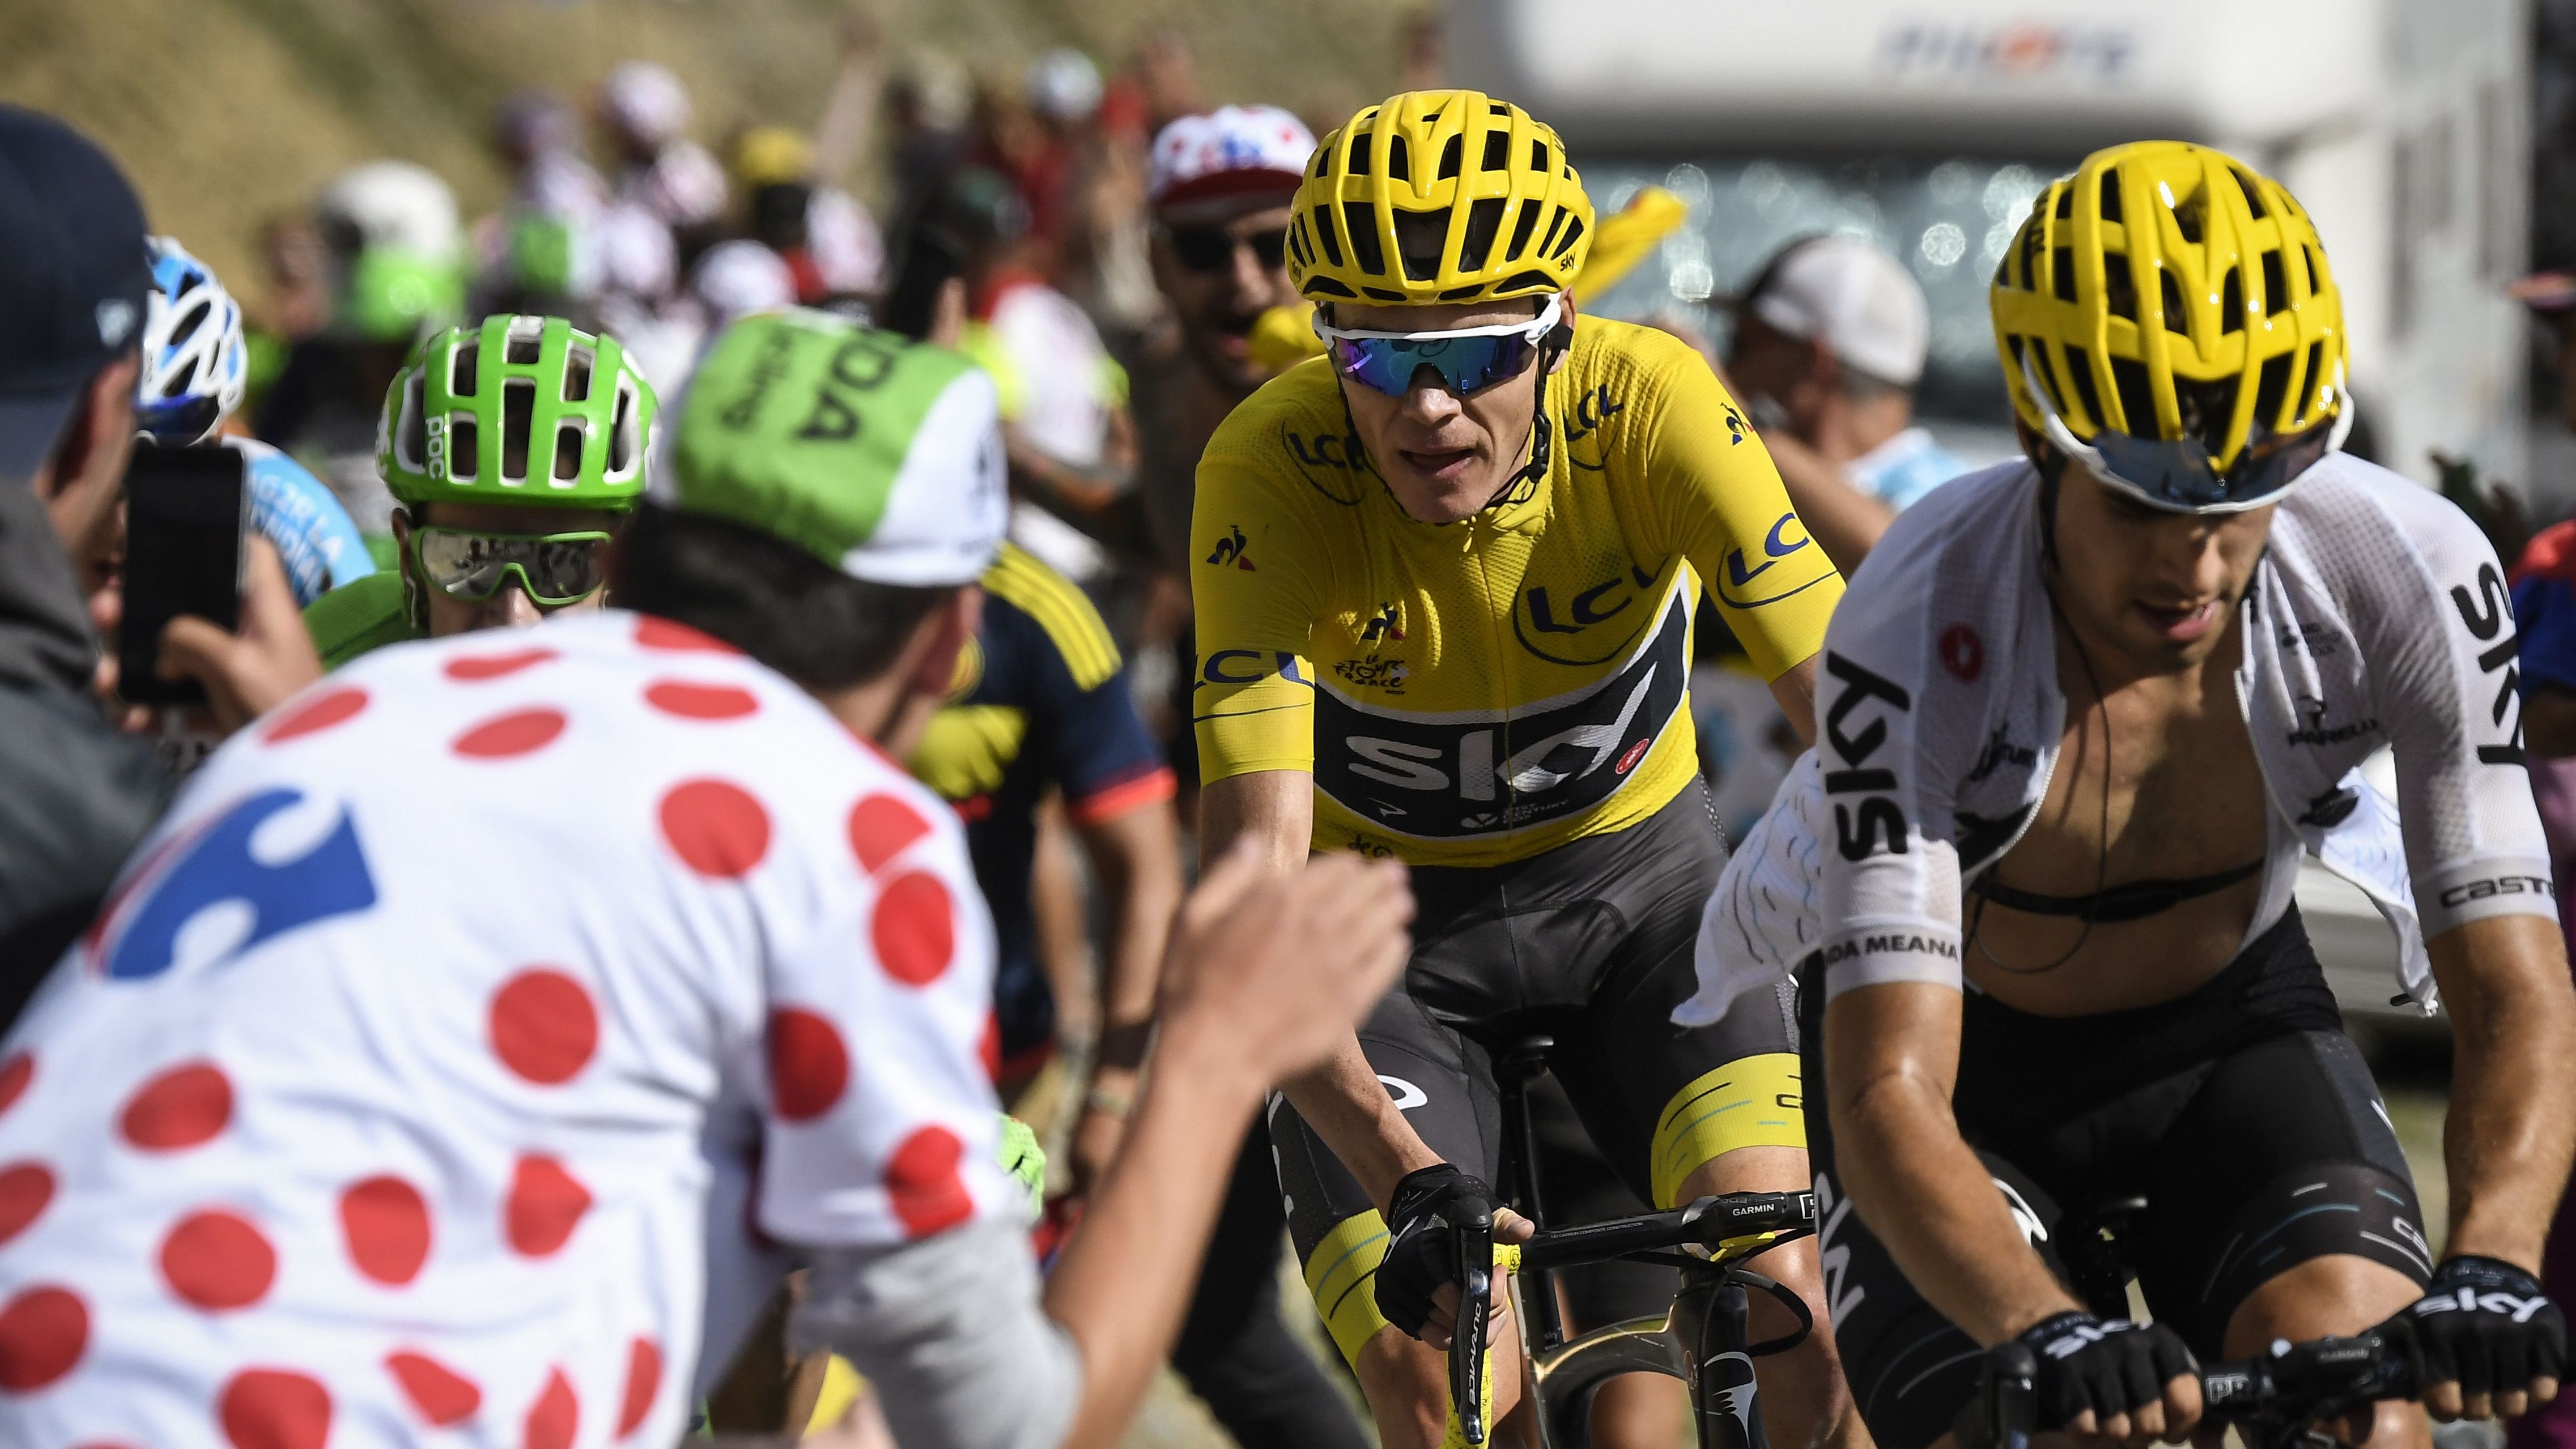 Chris Froome (in yellow) rides uphill through crowds of fans during the 2017 Tour de France. 